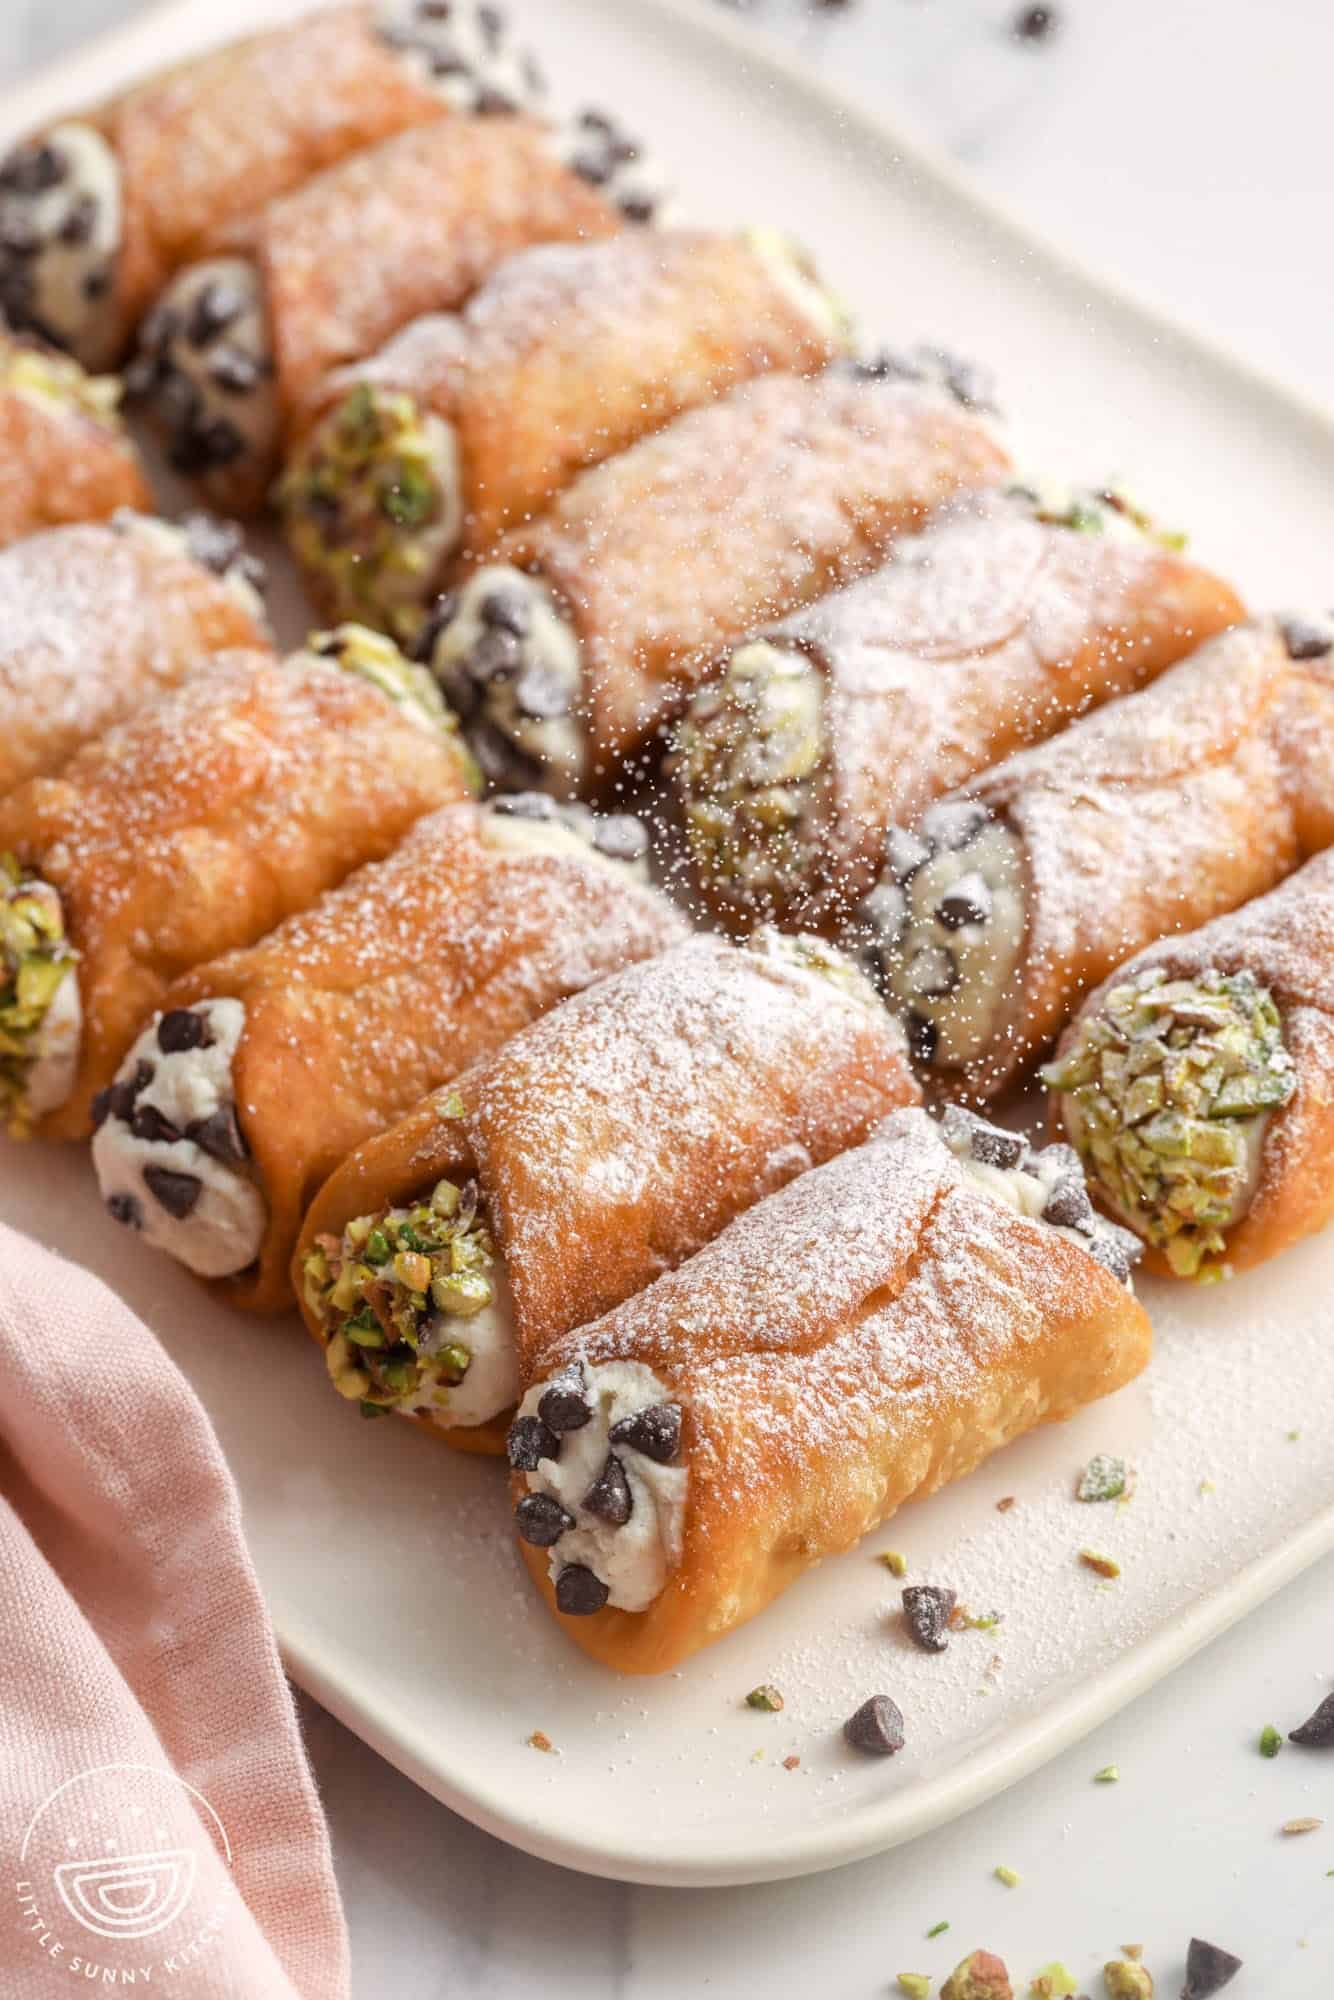 a rectangular white tray holding homemade cannoli filled with creamy filling and dipped in chocolate chips and pistachios. Powdered sugar is being sifted over the cannoli